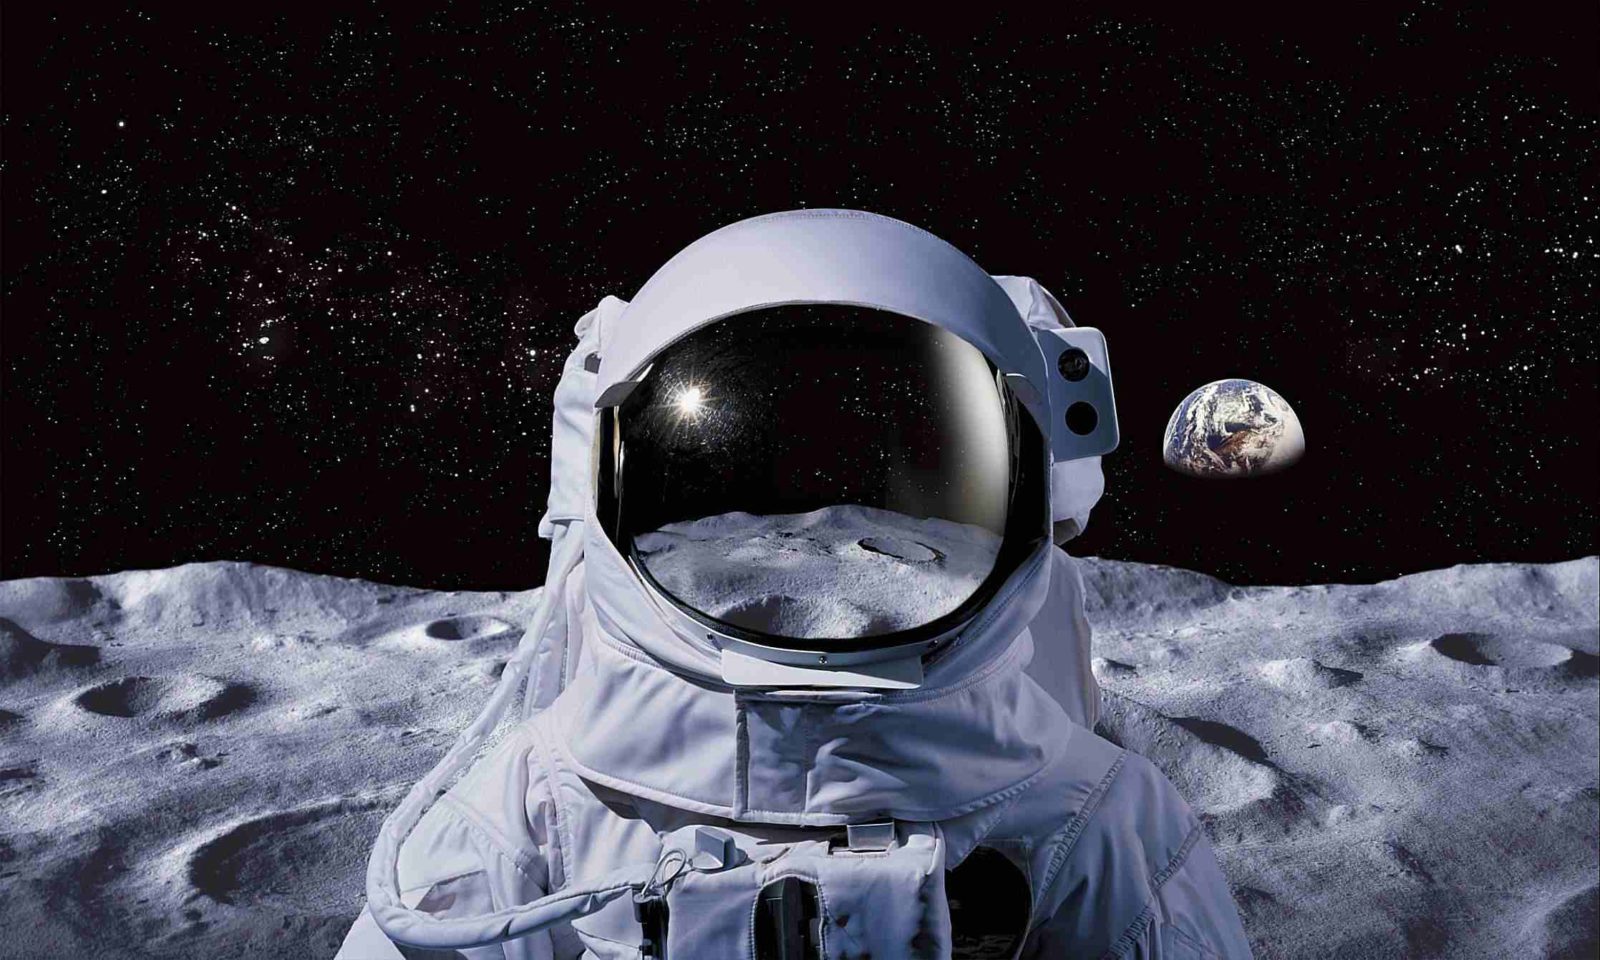 NASA working on space dust repeller & AR headset for astronauts